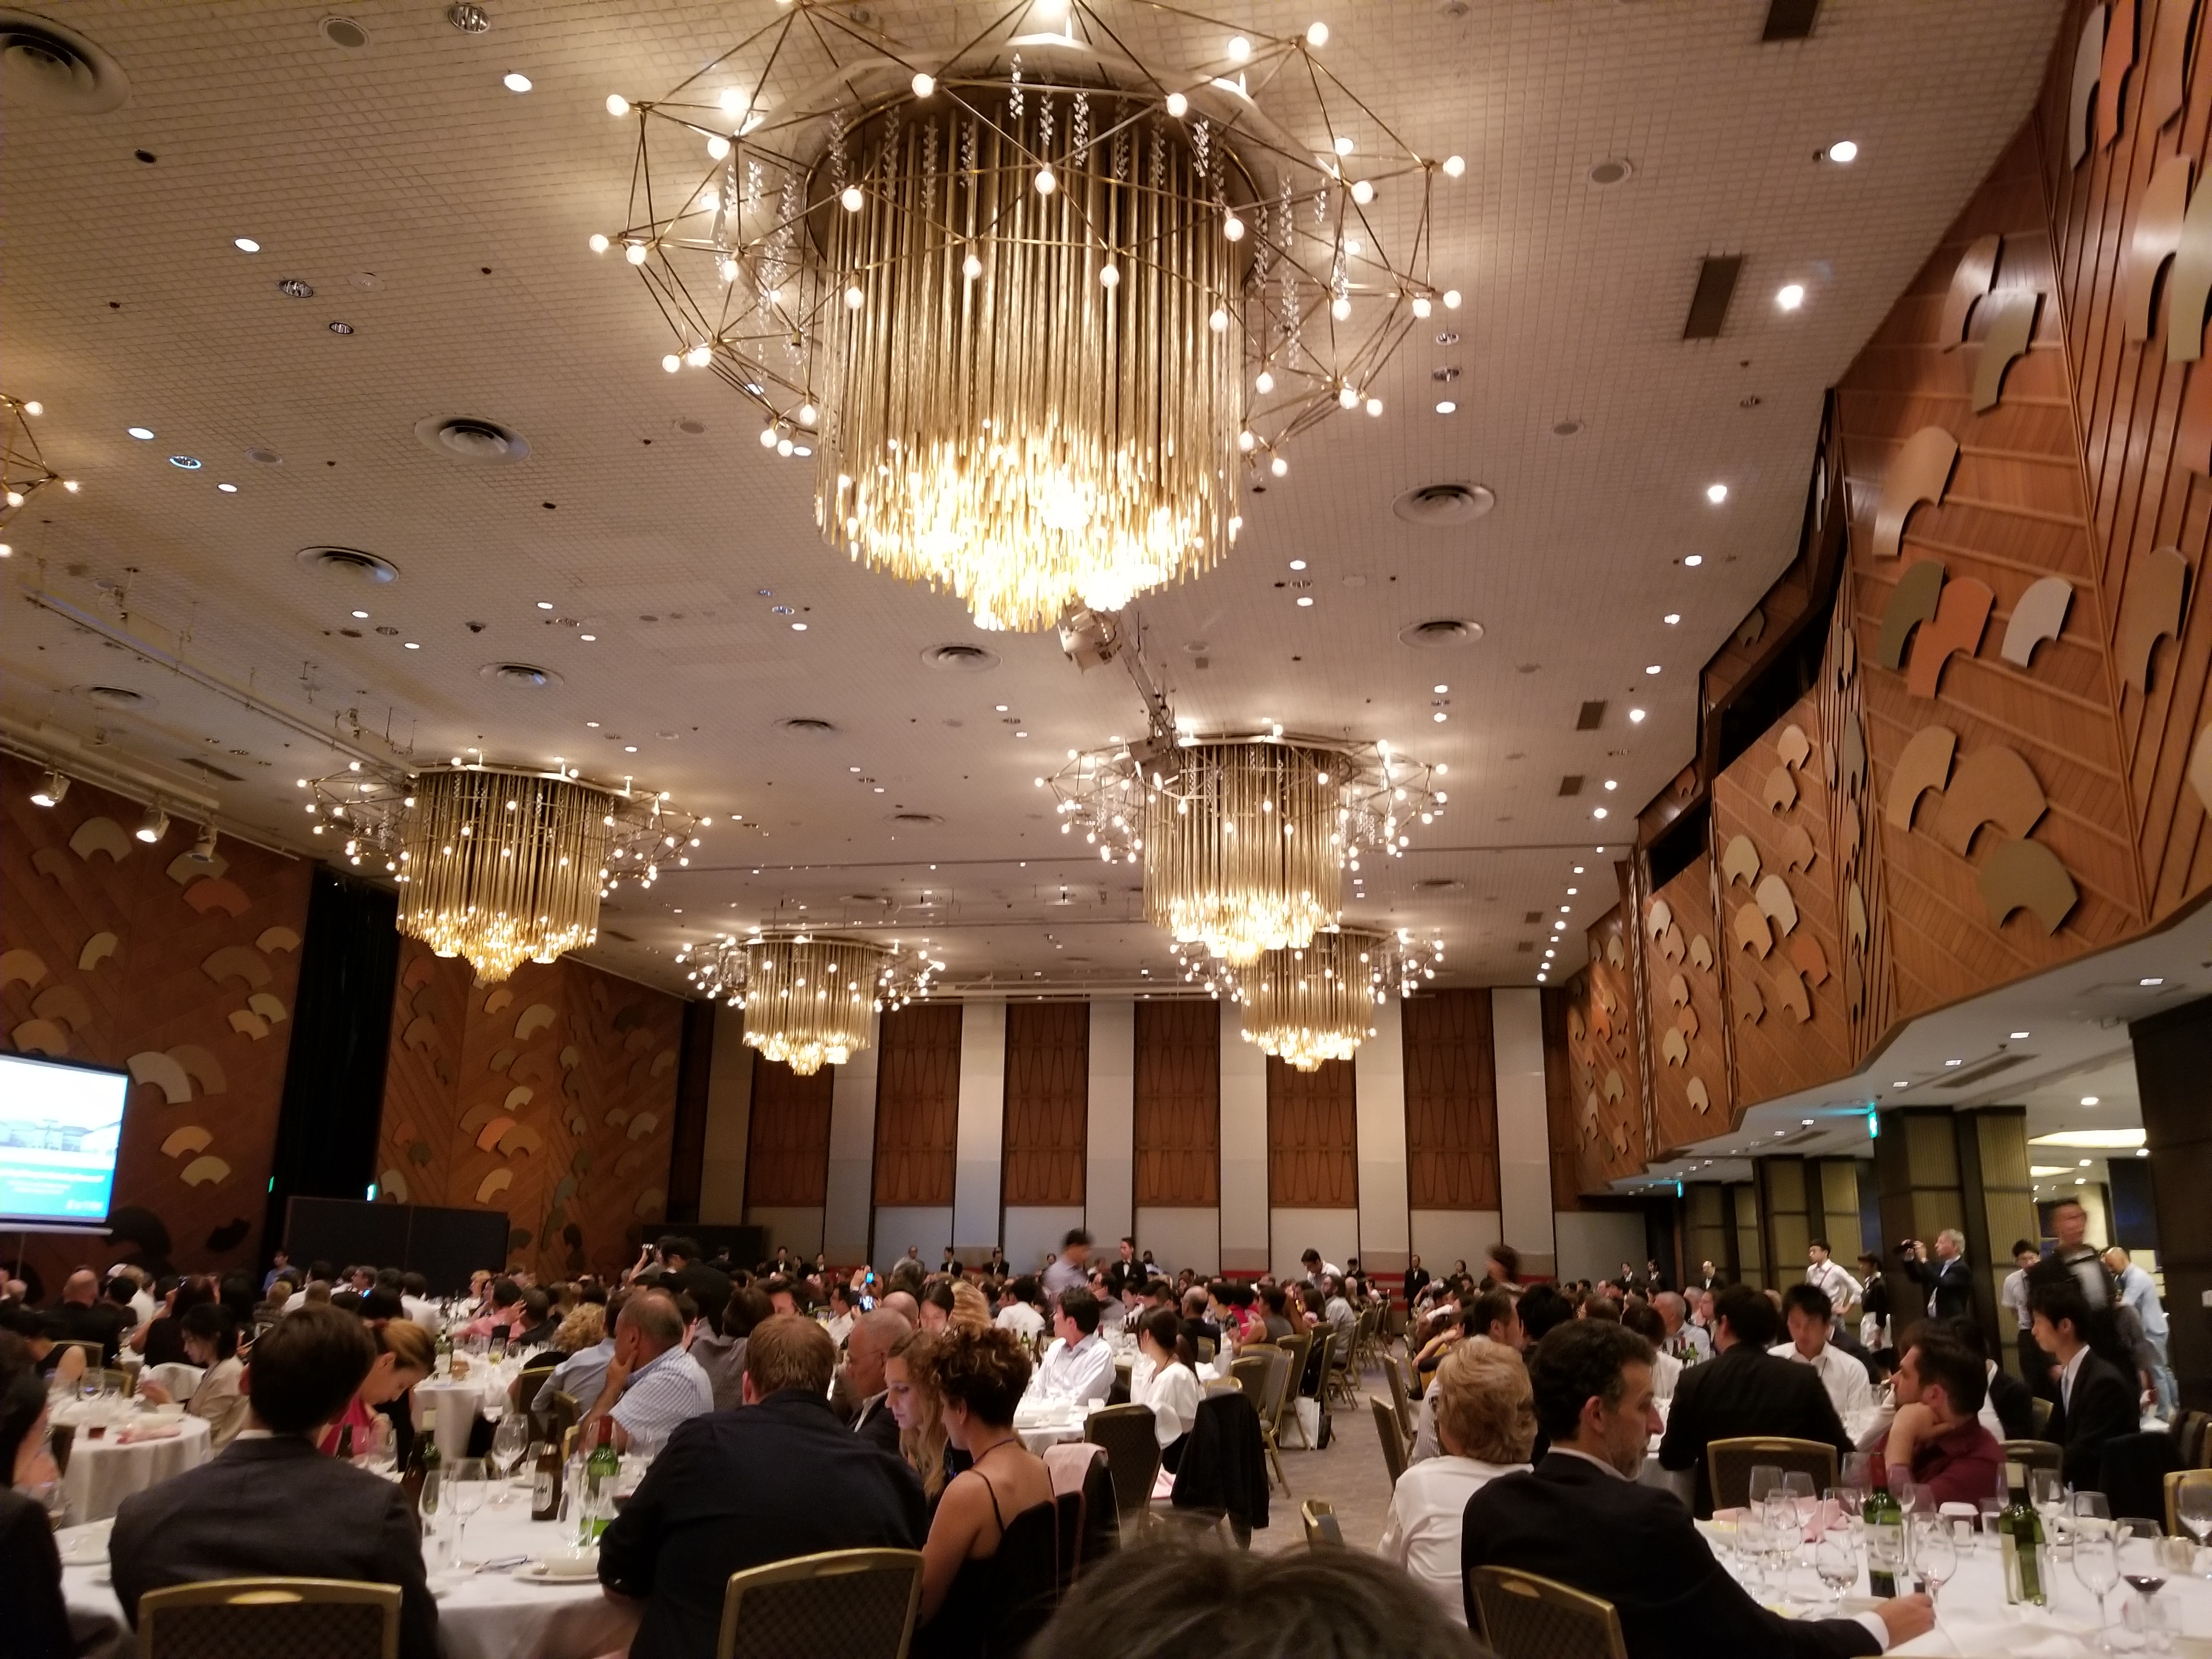 Conference dinner at 2018 GMC (Global Marketing Conference) Tokyo 